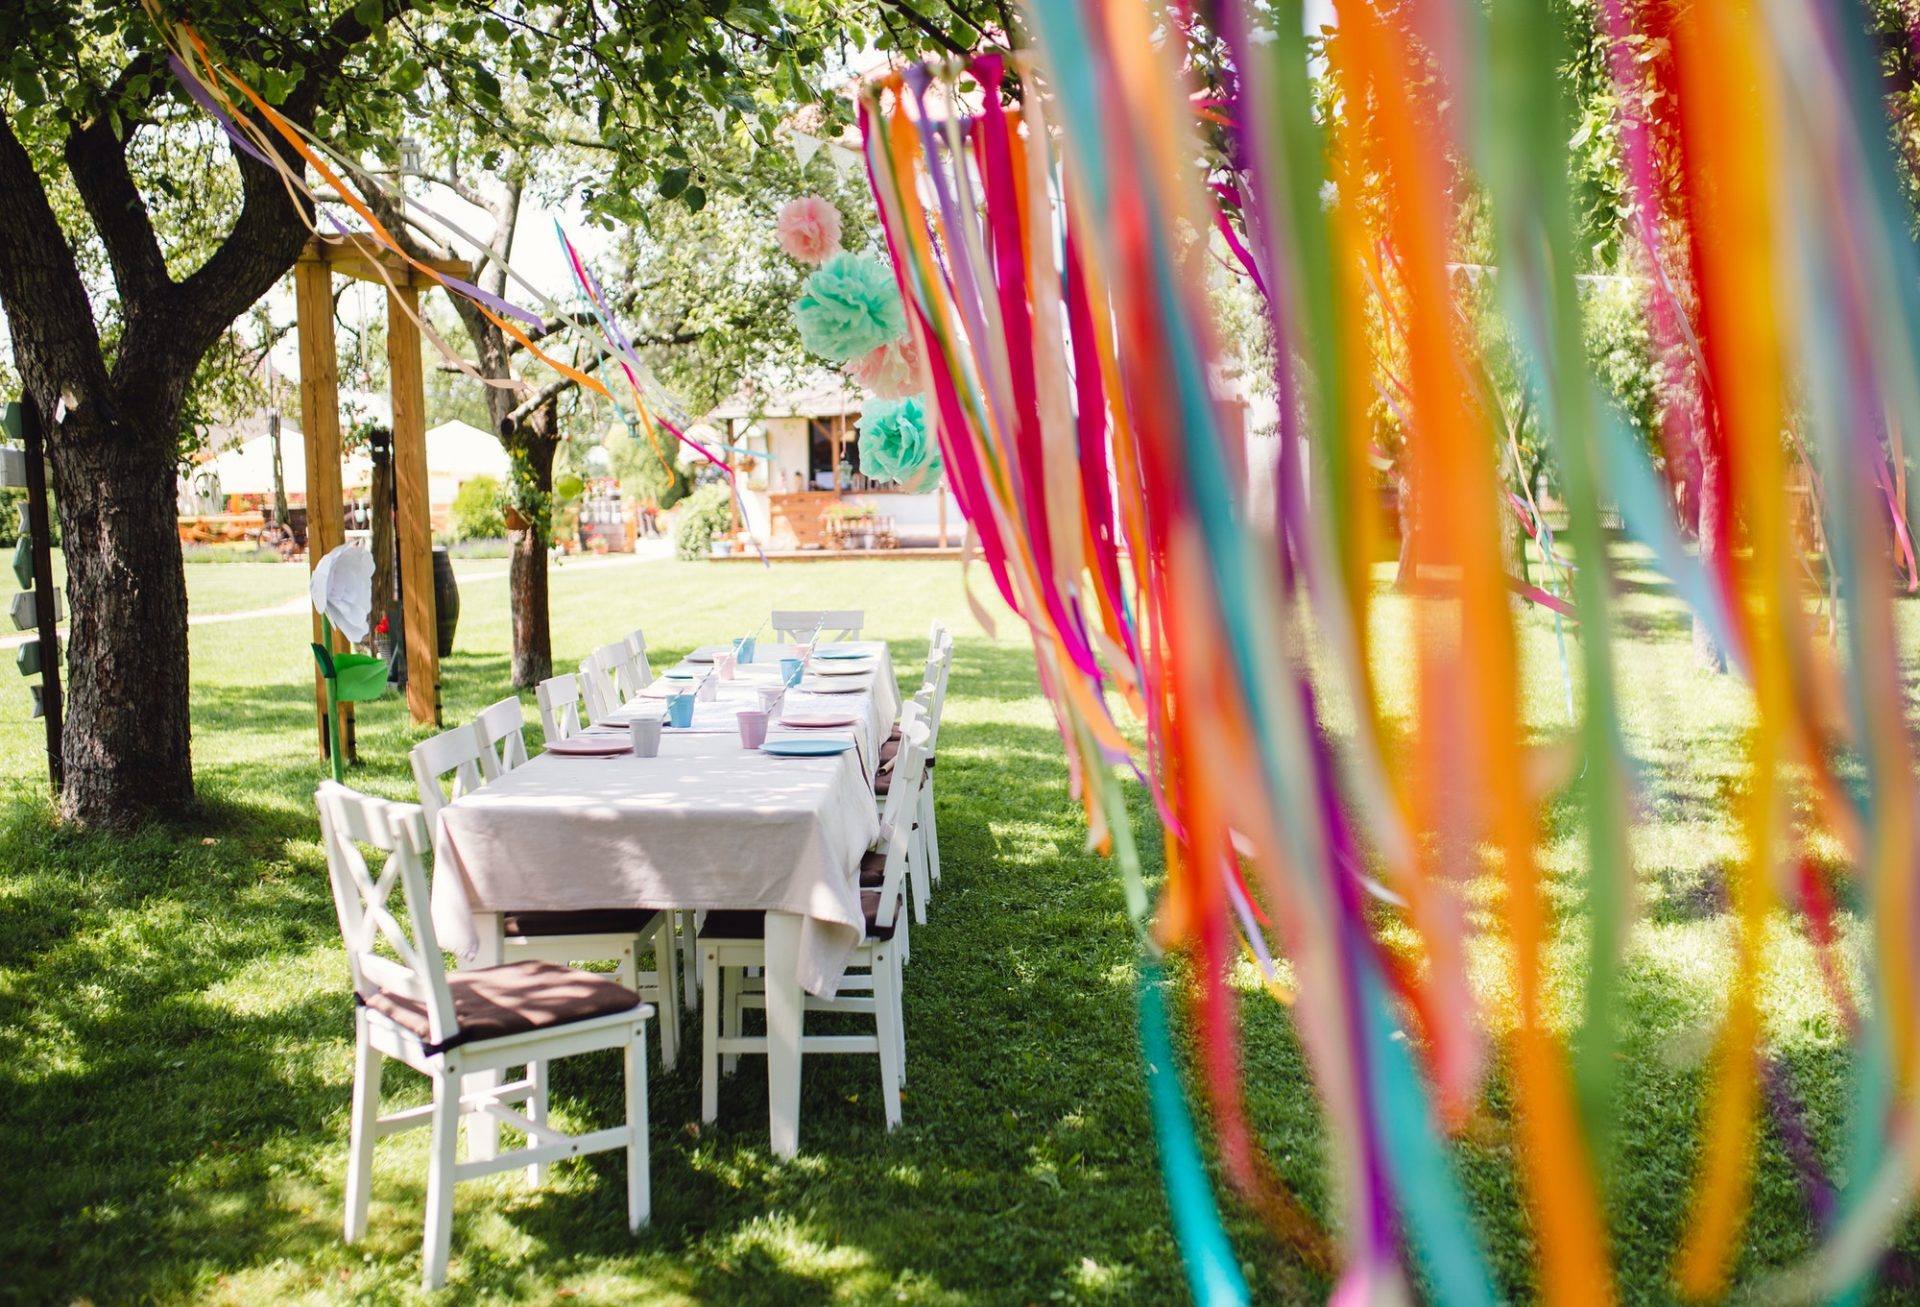 A table set for kids birthday party outdoors in garden in summer.